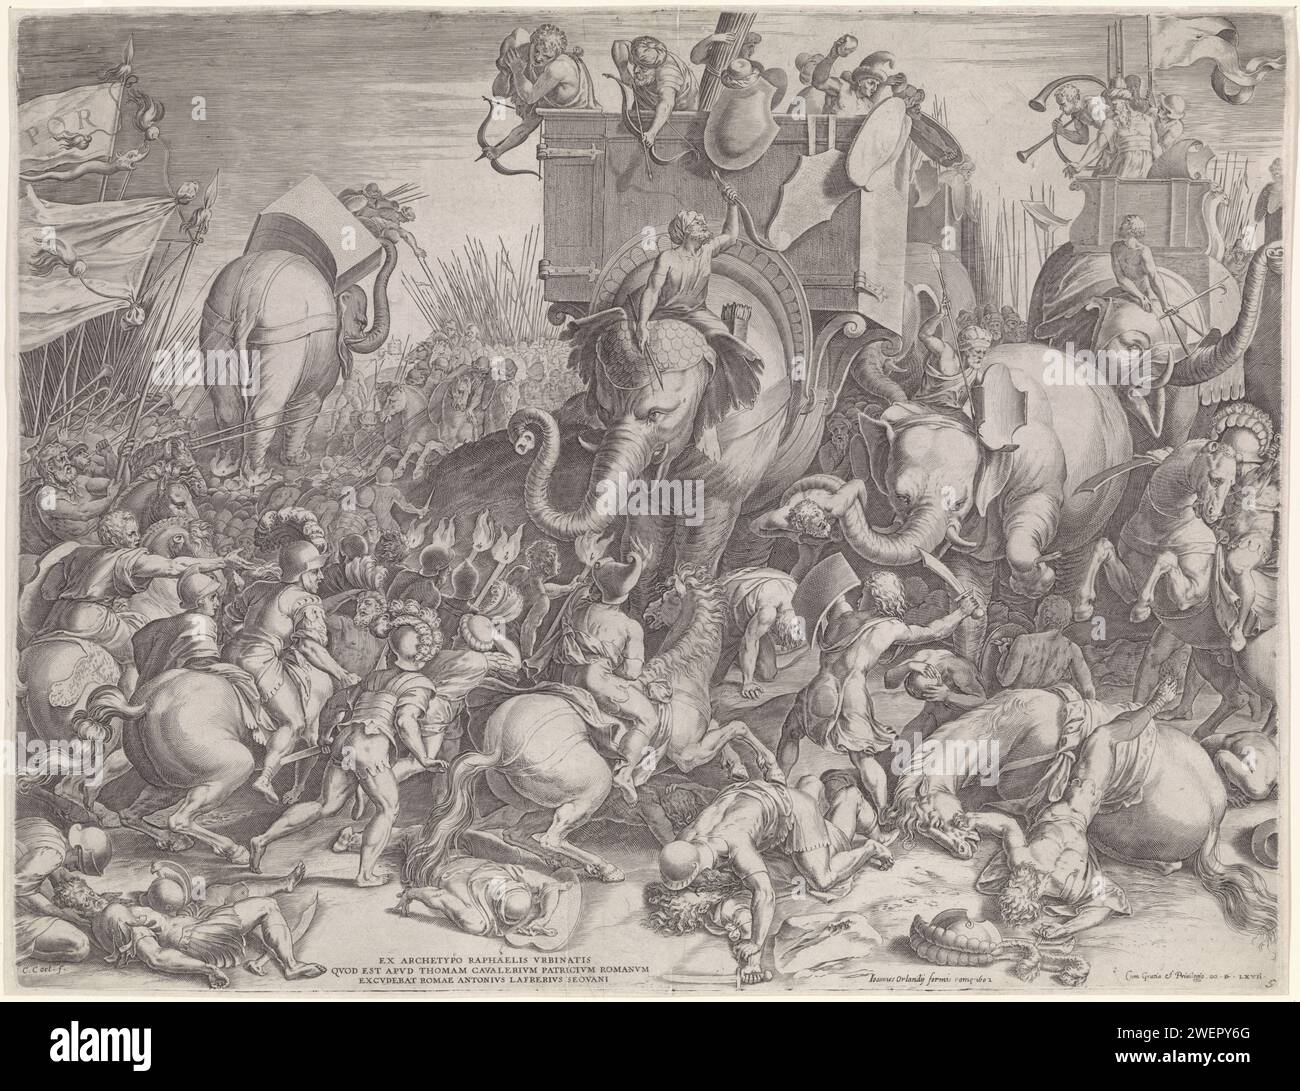 Battle of Zama between Scipio and Hannibal, Cornelis Cort, After Giulio Romano, 1567 - 1602 print Battle between Rome and Carthage, led by Scipio and Hannibal. The Carthagen army runs on elephants, the Romans are on foot and on horseback, but can eventually beat Carthage.  paper engraving (story of) P. Cornelius Scipio Africanus Major. Hannibal crosses the Alps with his army and his elephants. trunked animals: elephant. battle Stock Photo